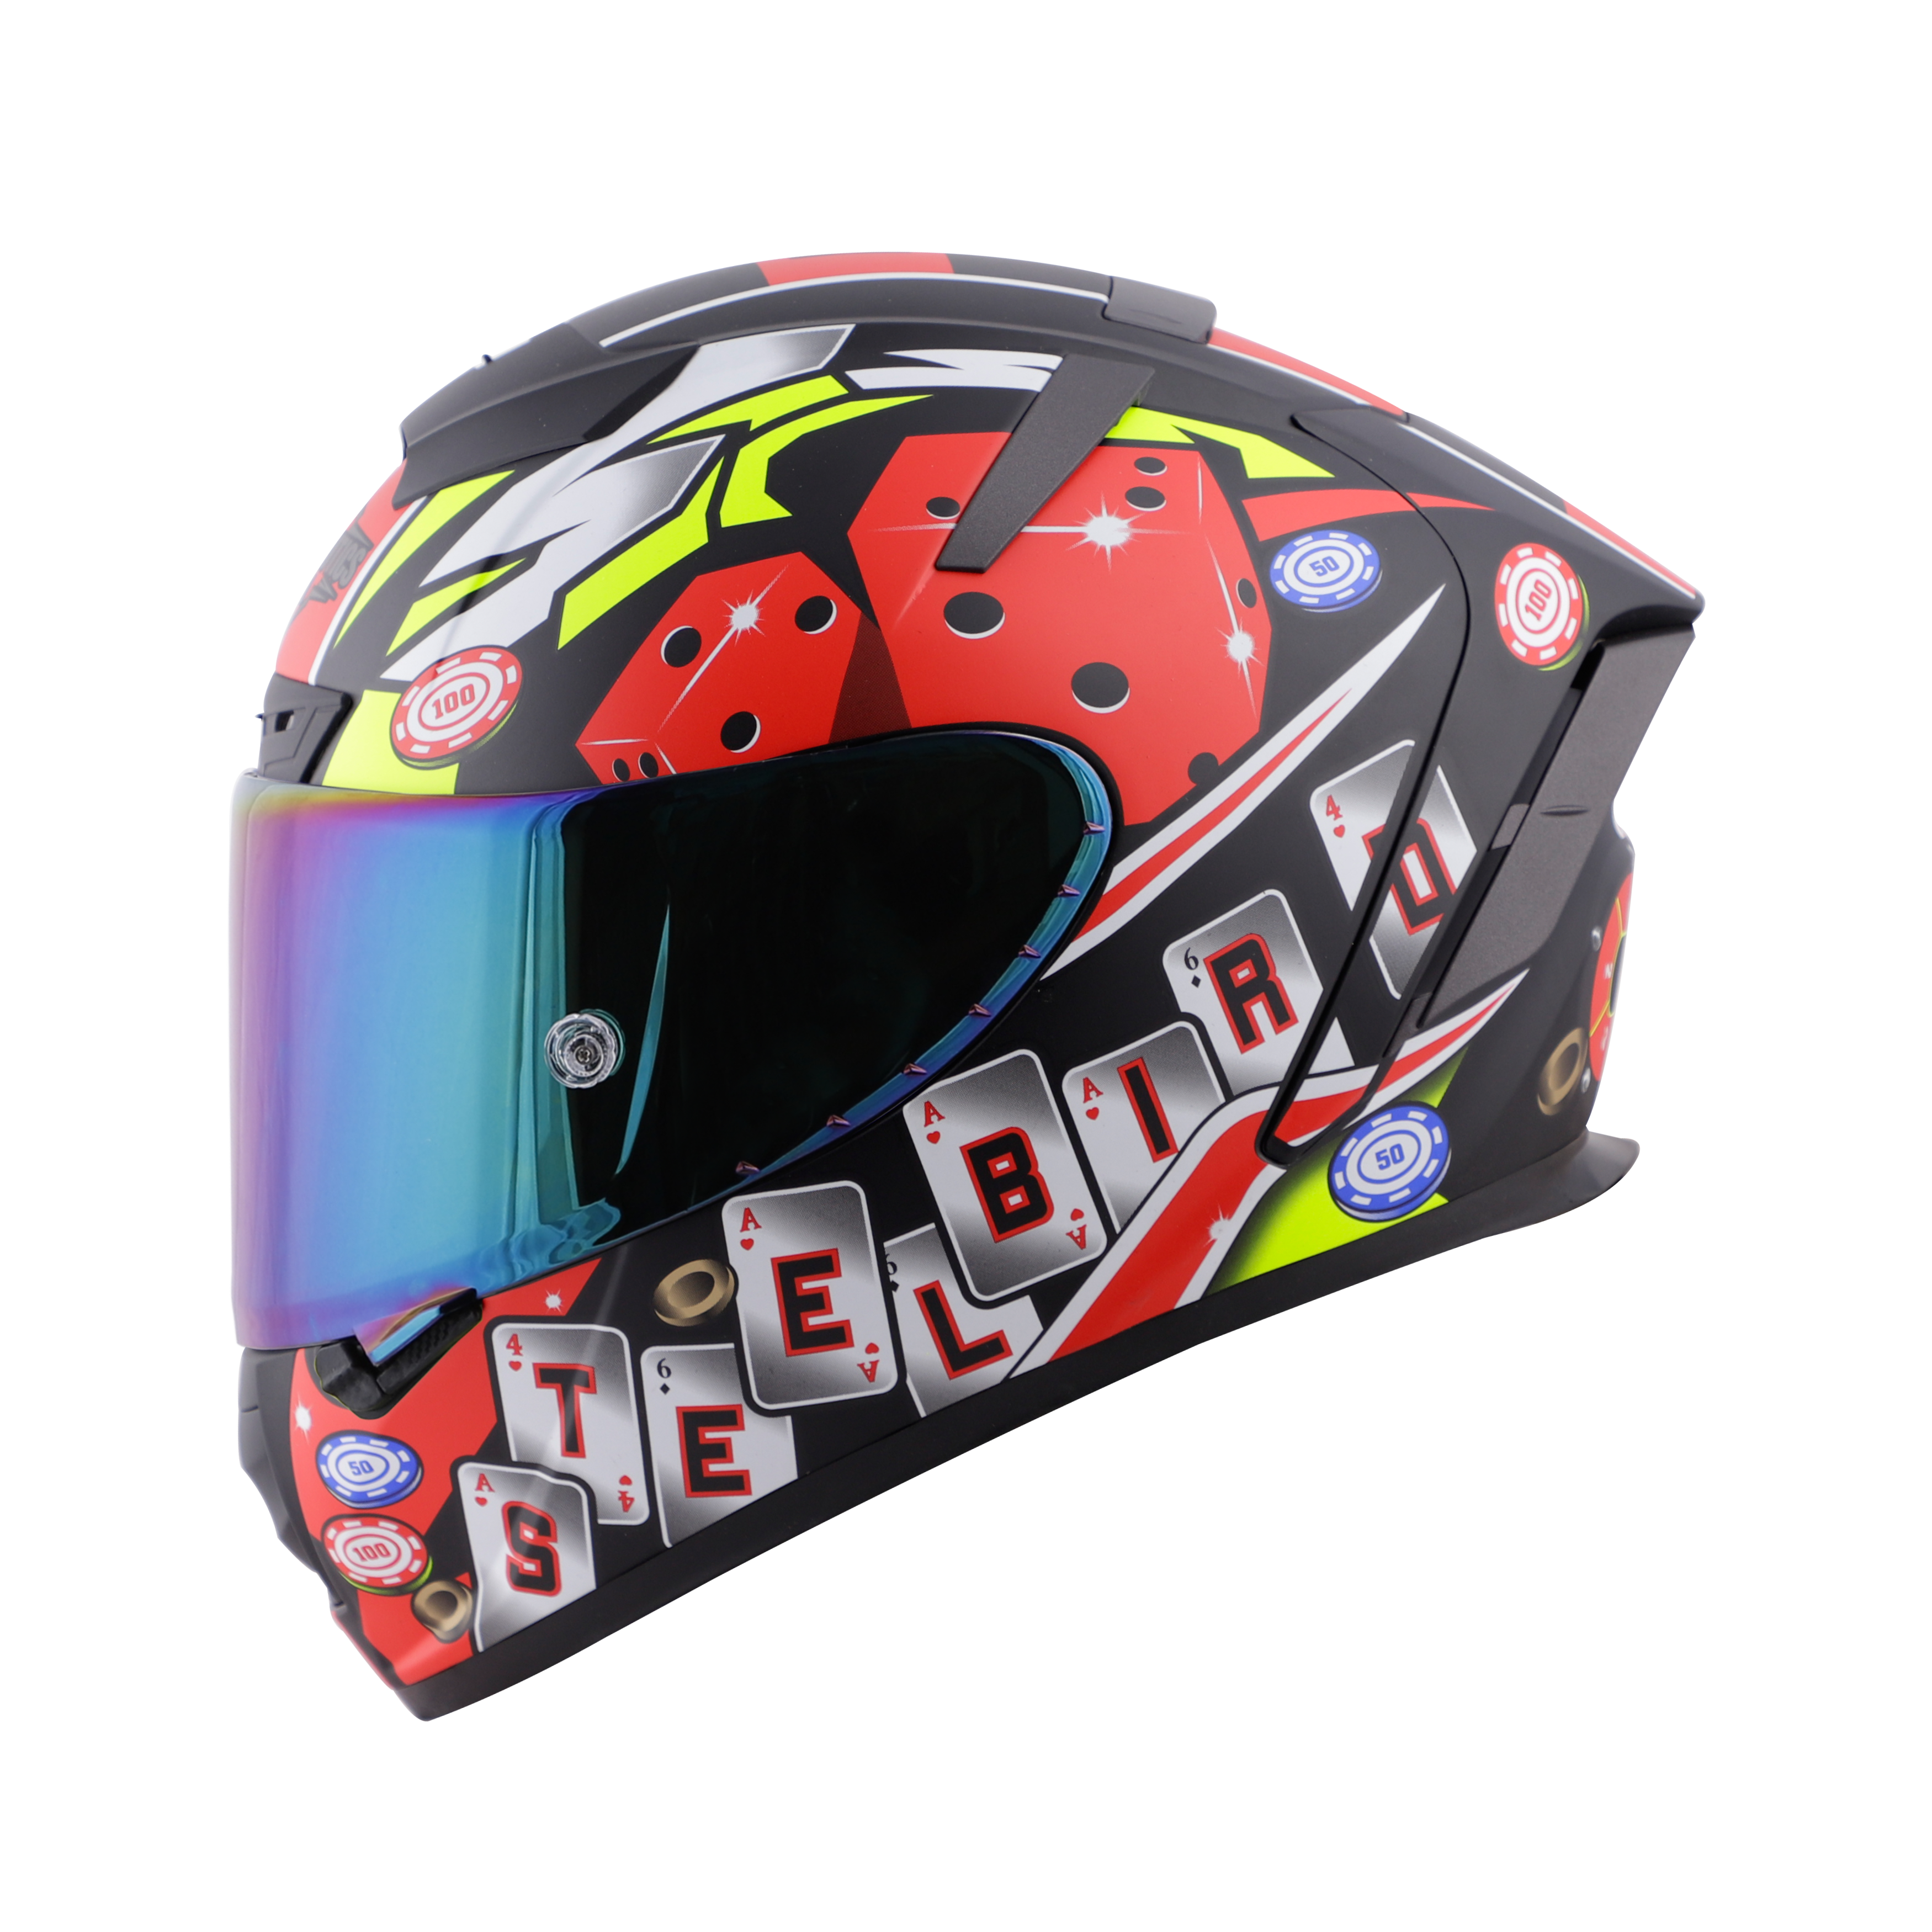 SA-2 CASINO GOLSSY BLACK WITH RED ( FITTED WITH CLEAR VISOR EXTRA RAINBOW CHROME VISOR FREE WITH ANTI-FOG SHIELD HOLDER)